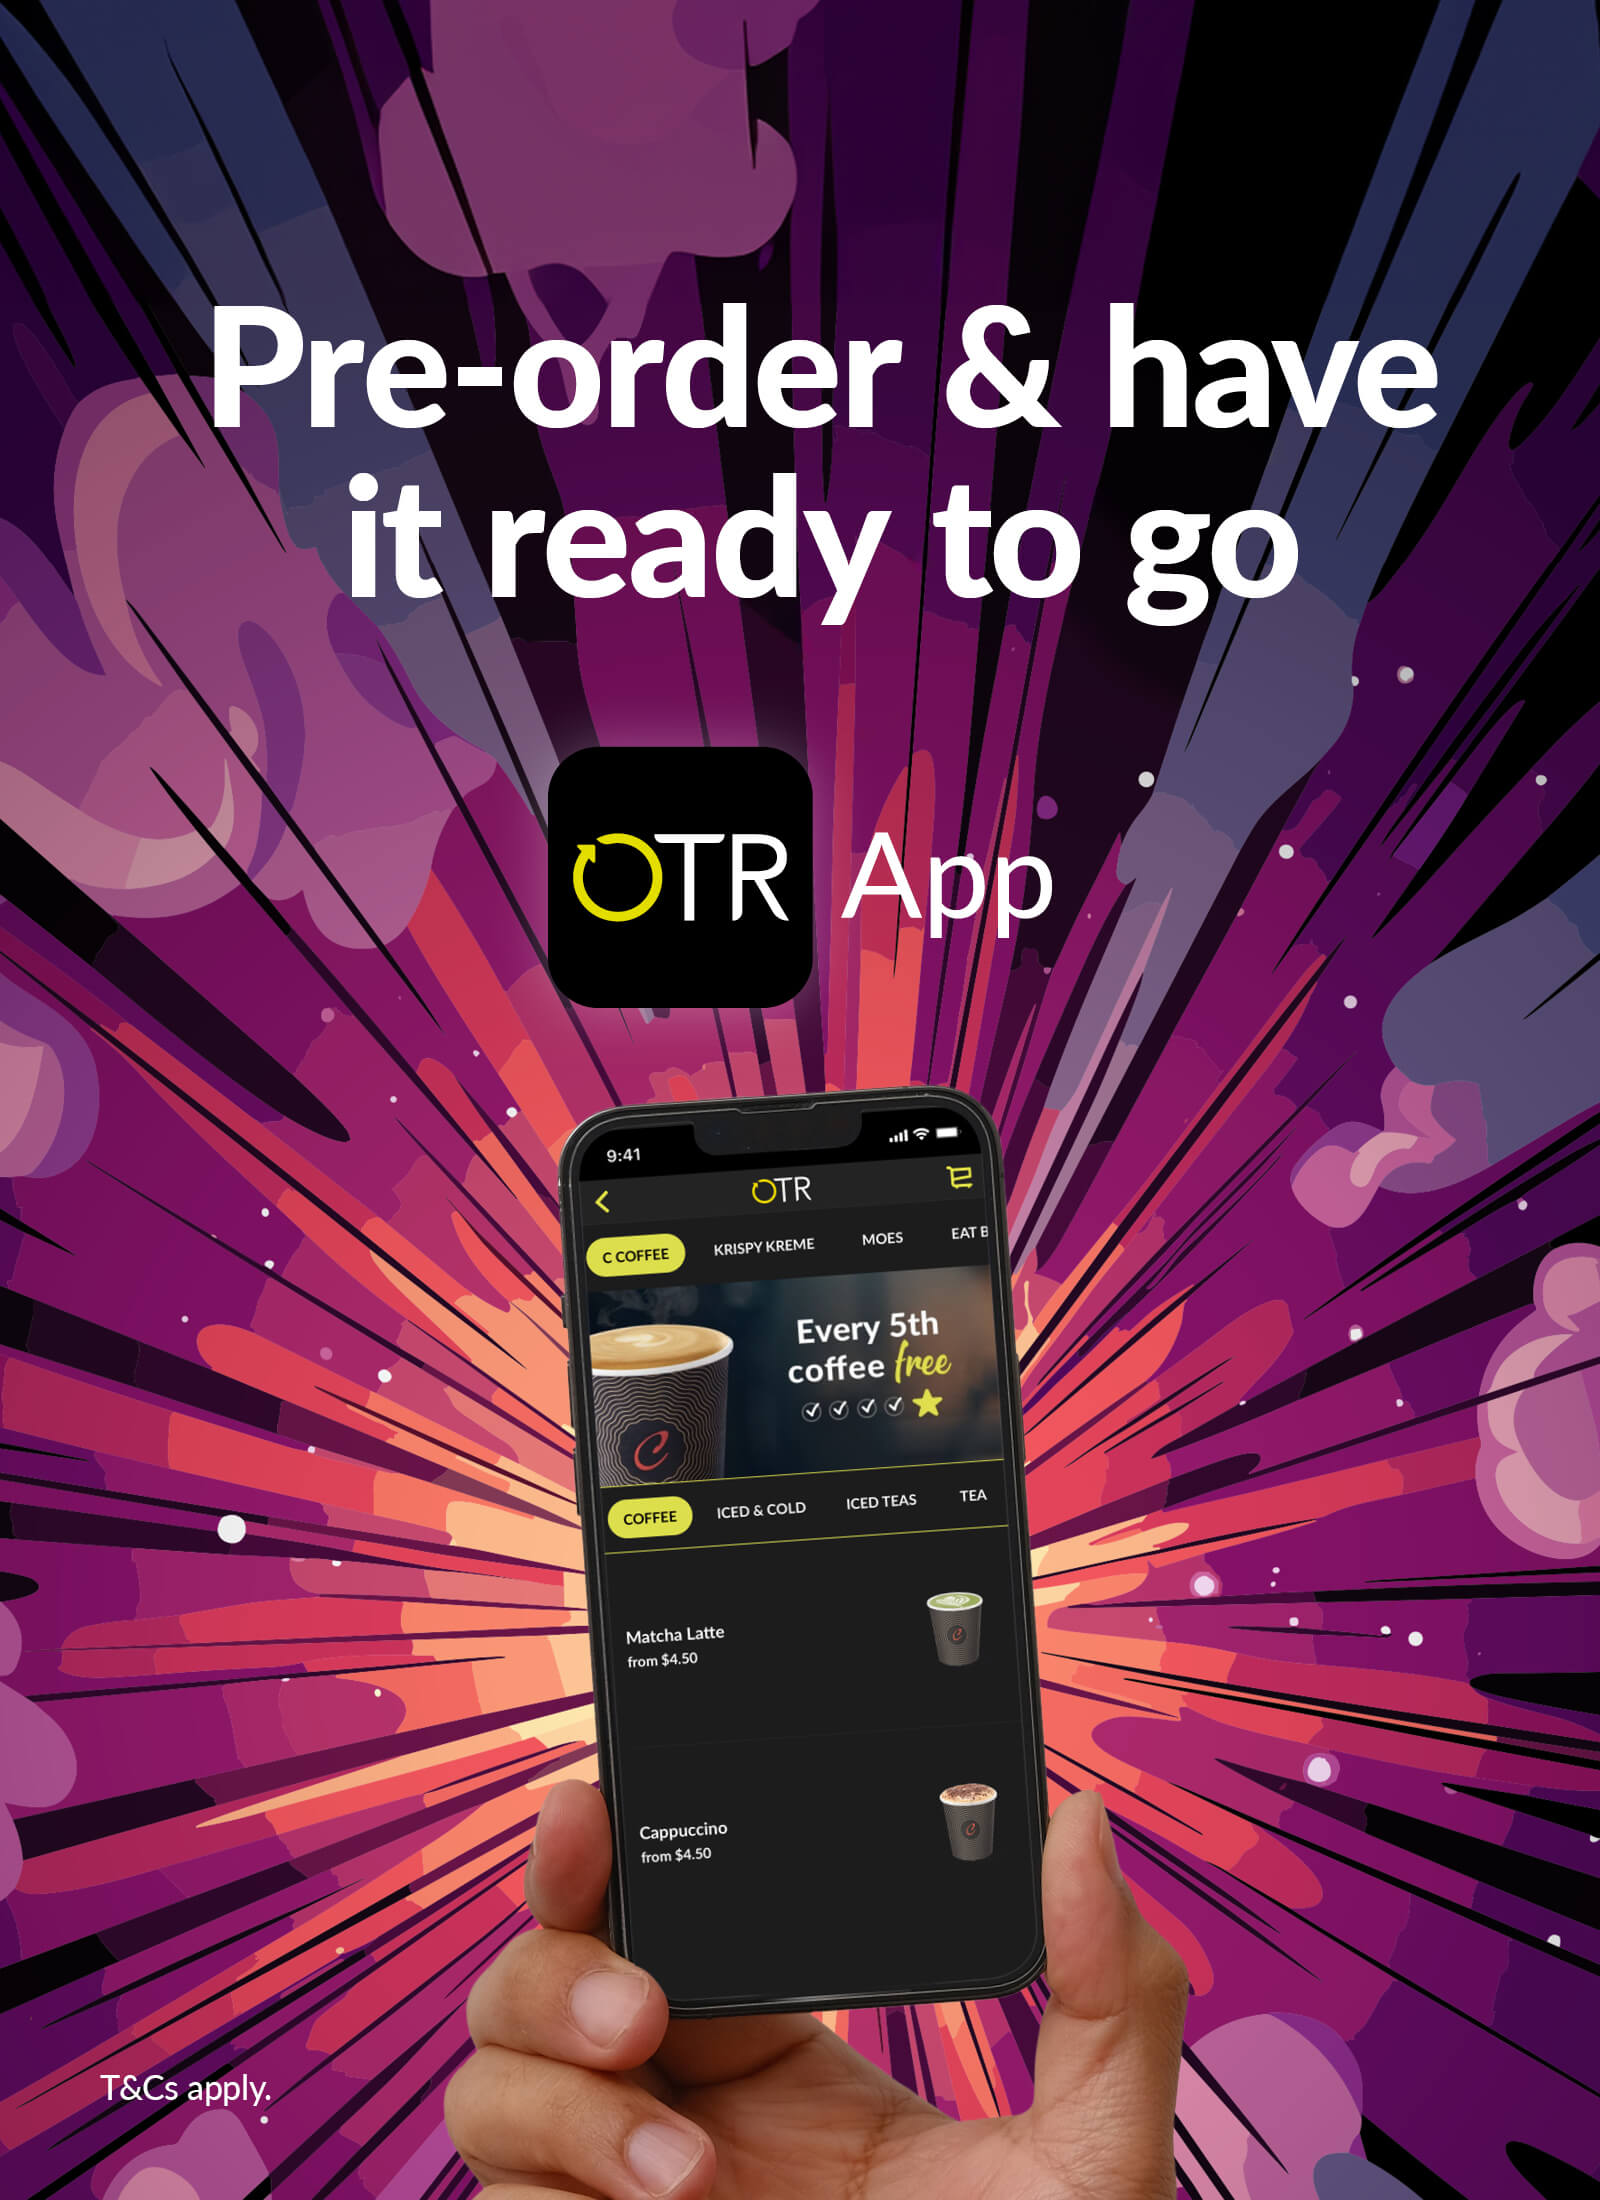 OTR App - Pre-order & have it ready to go